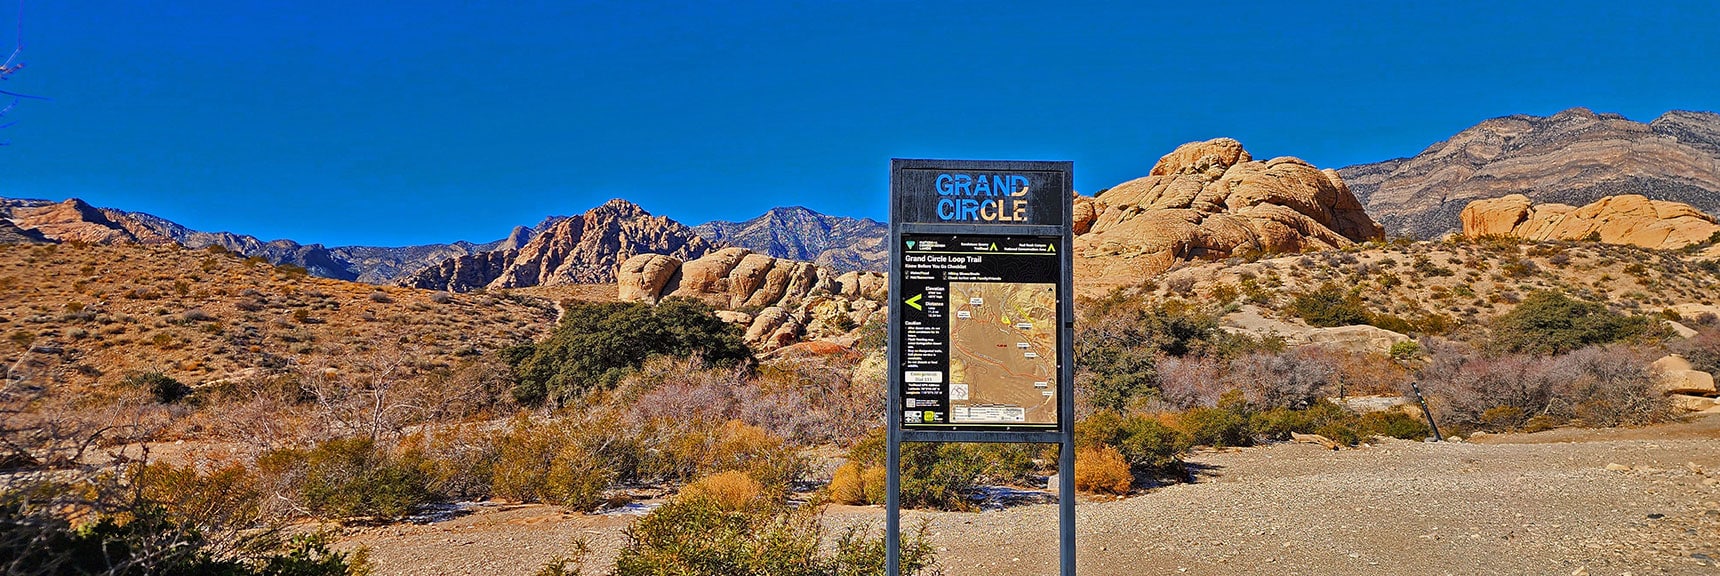 Grand Circle Loop Splits Off to the Left Here. Keep to the Right. | 3 Basin Circuit | Calico Basin, Brownstone Basin, Red Rock Canyon, Nevada